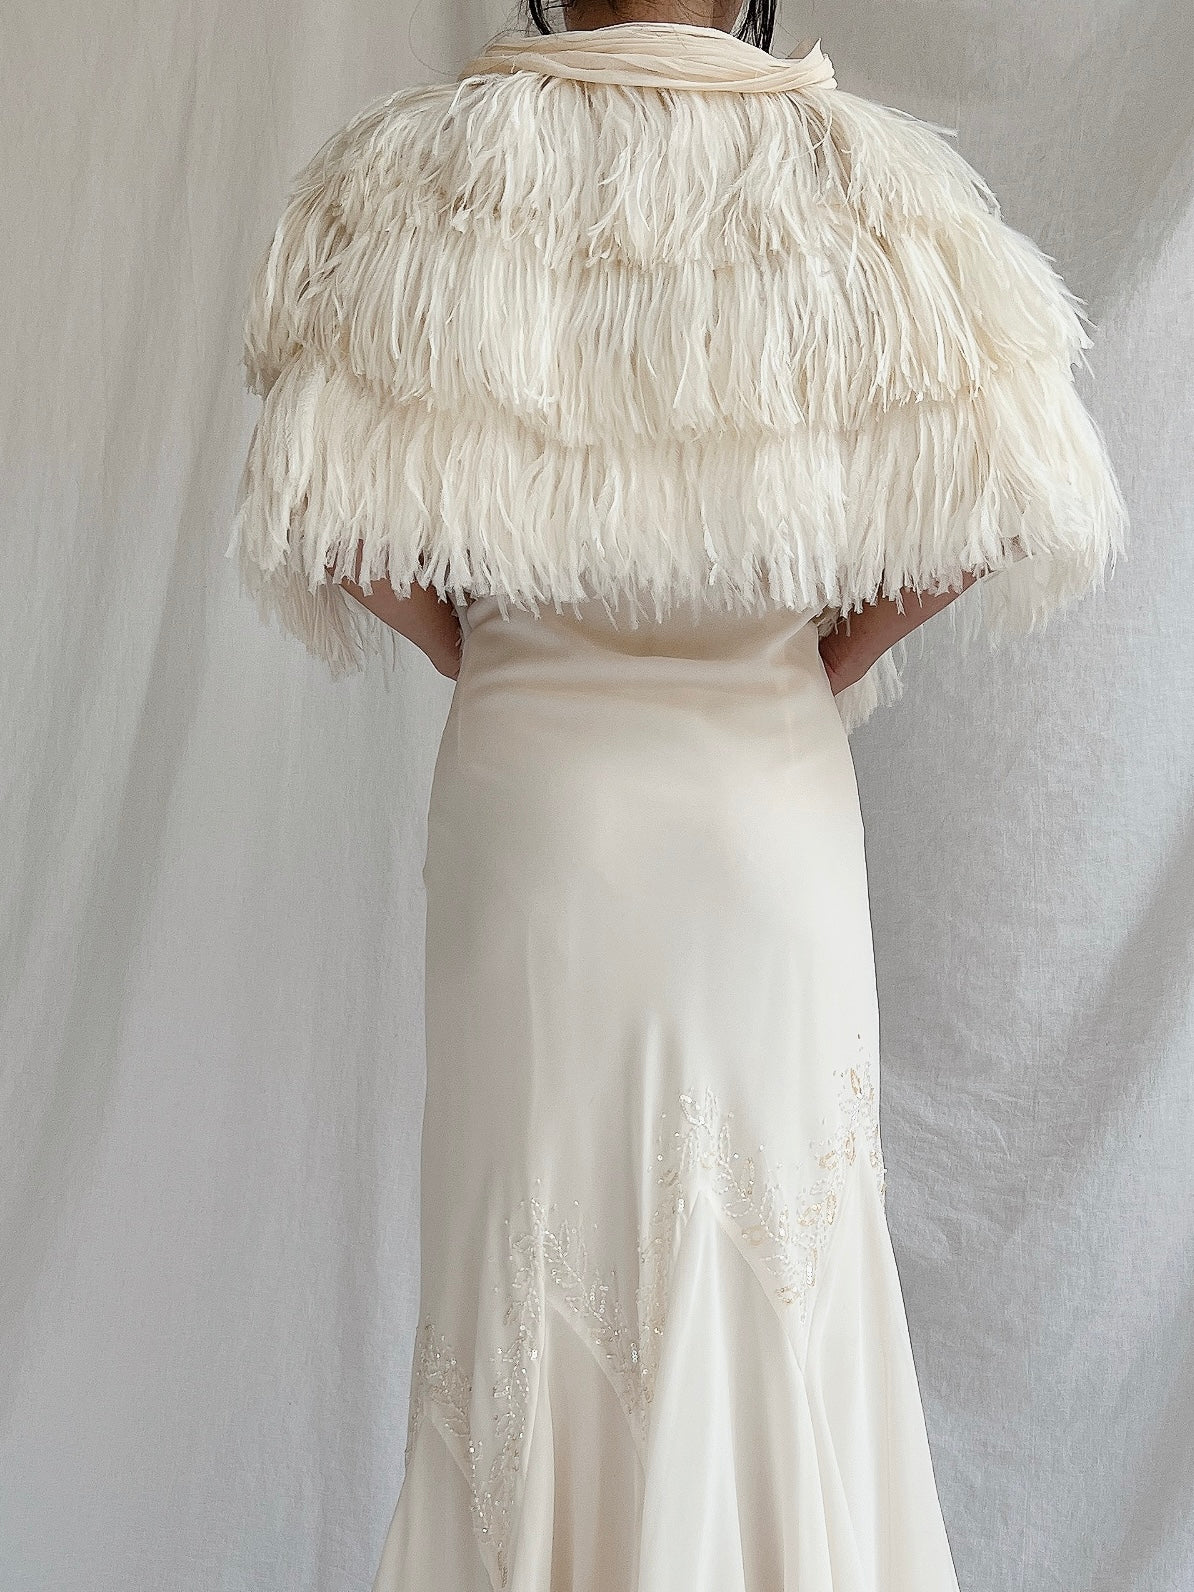 1930s Rayon and Feather Capelet - OSFM